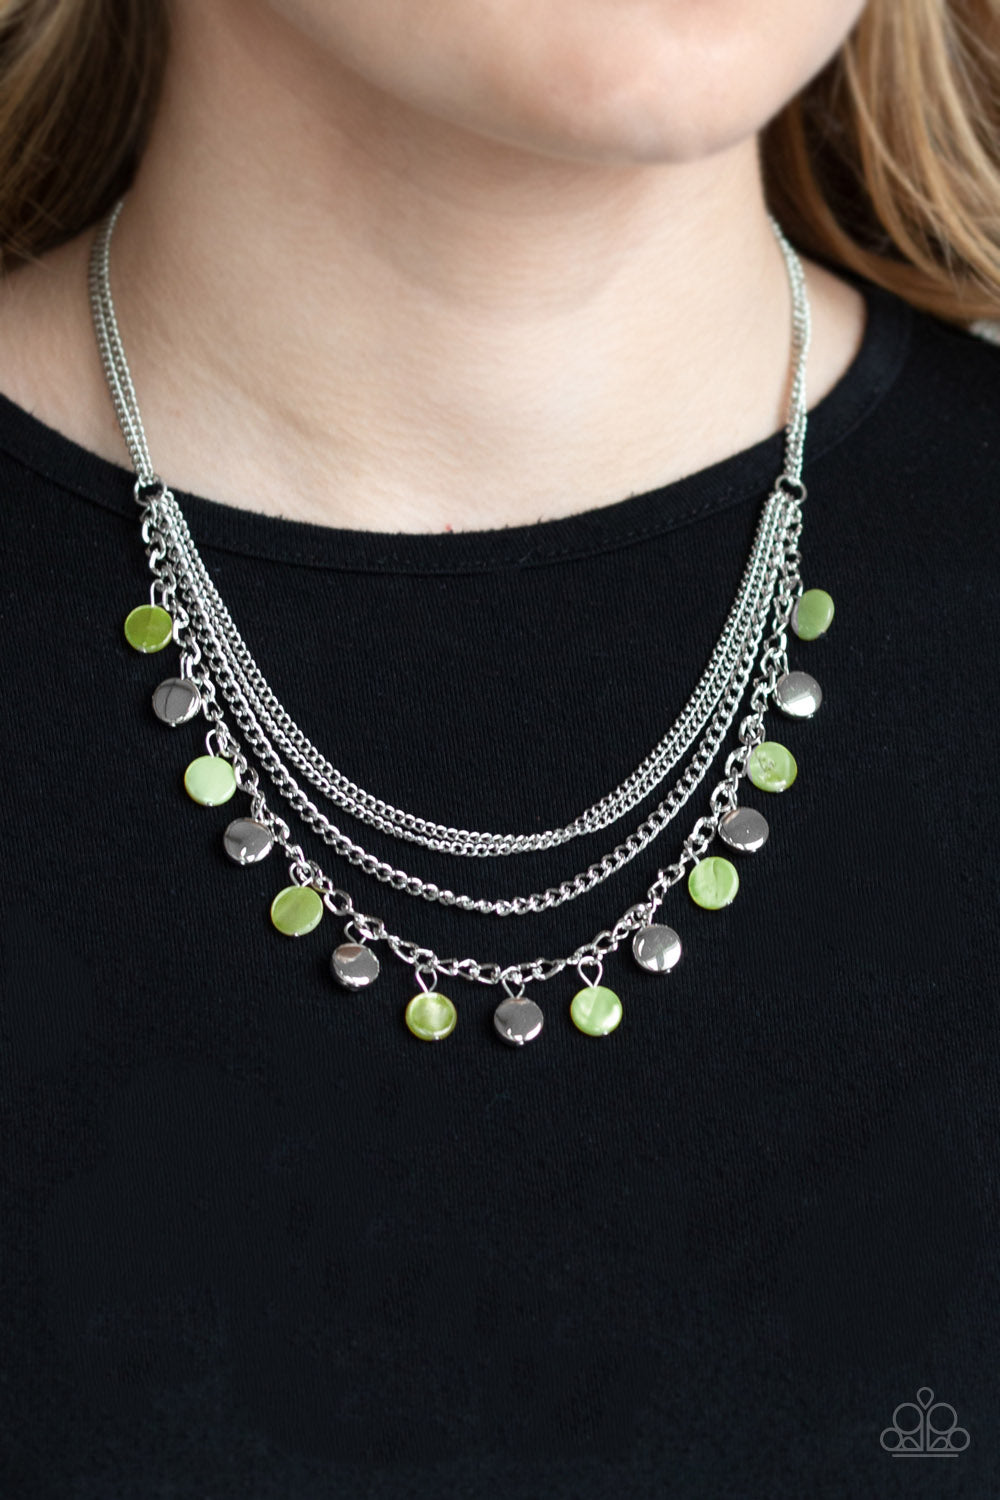 Paparazzi Beach Flavor Green Necklace perfect for a day out. Casual every day wear. 